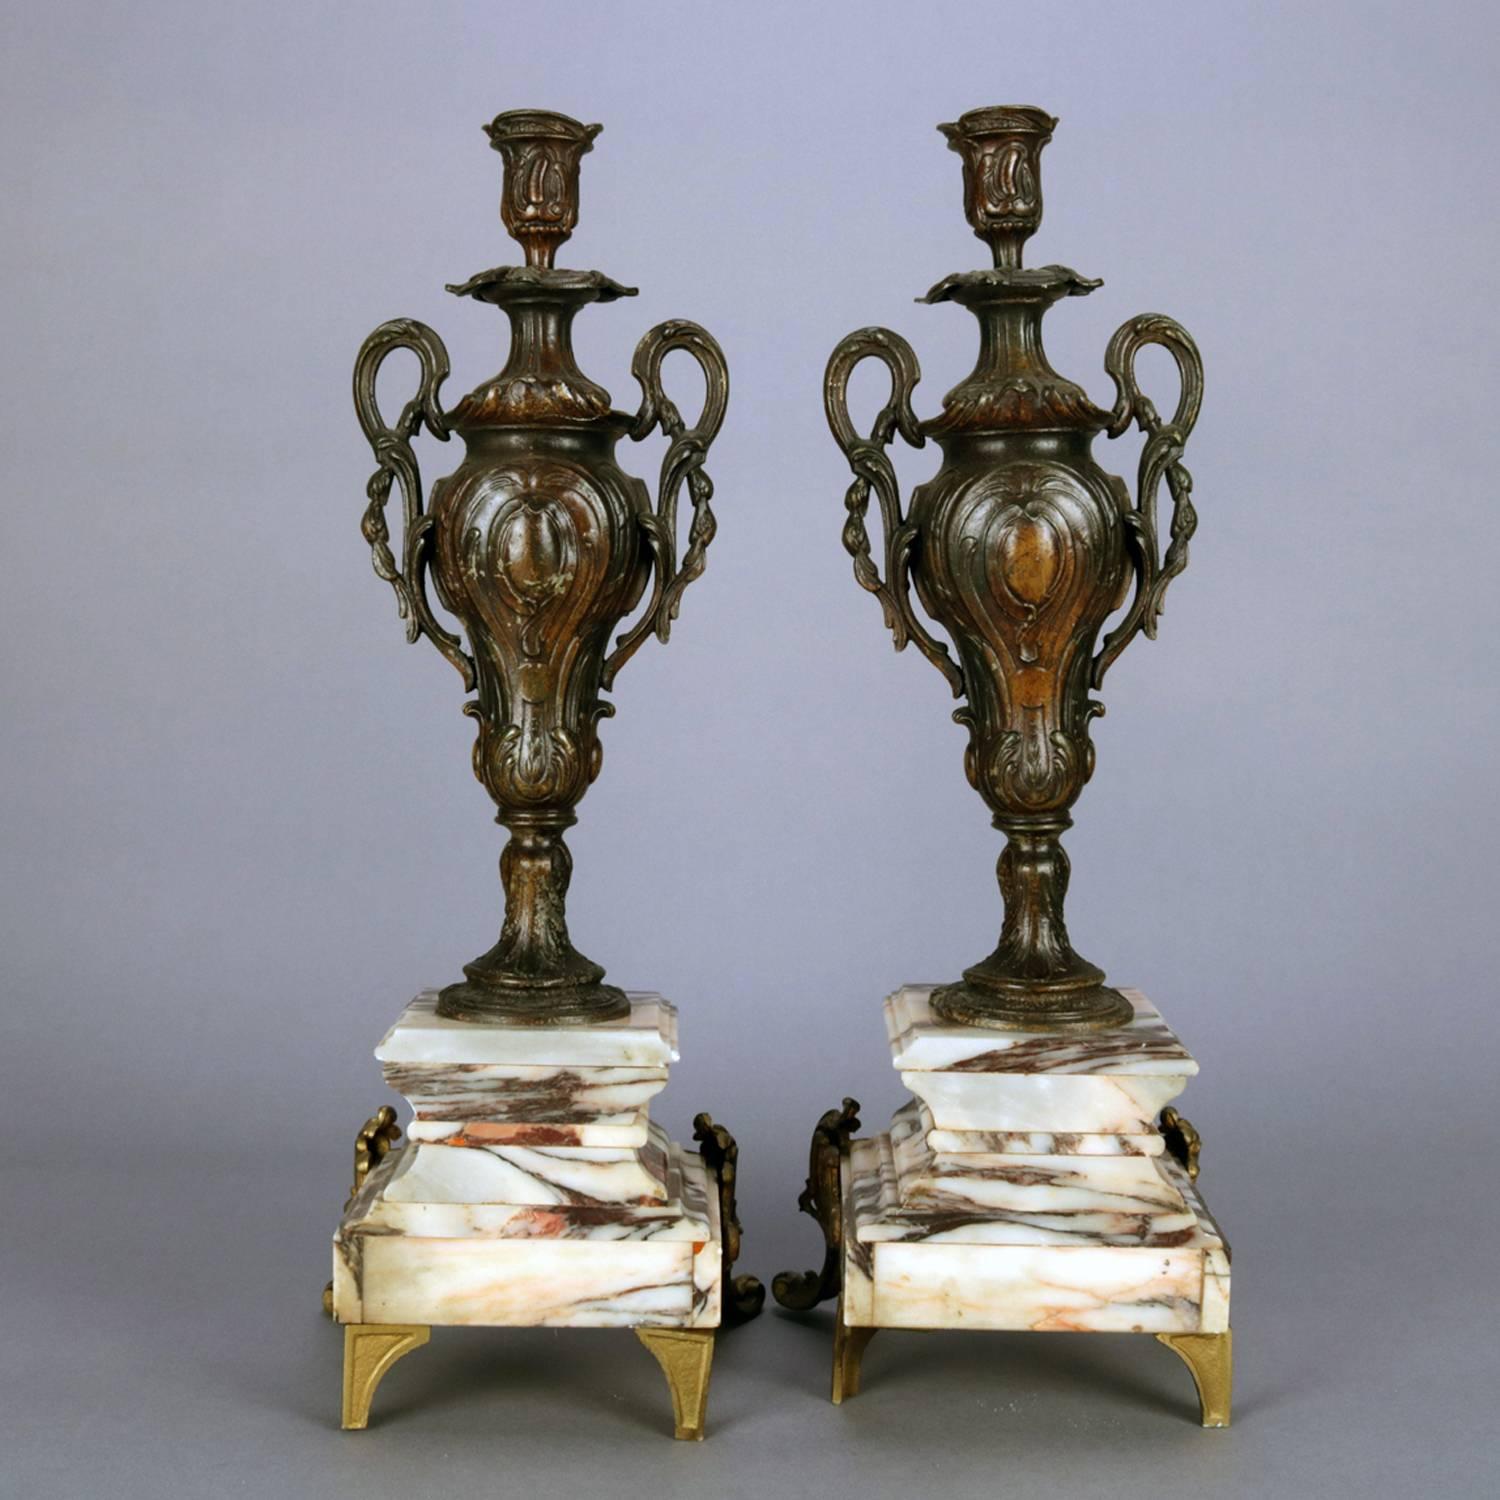 French Pair of Classical Parcel-Gilt and Bronzed Urn Form Candlesticks on Marble Base